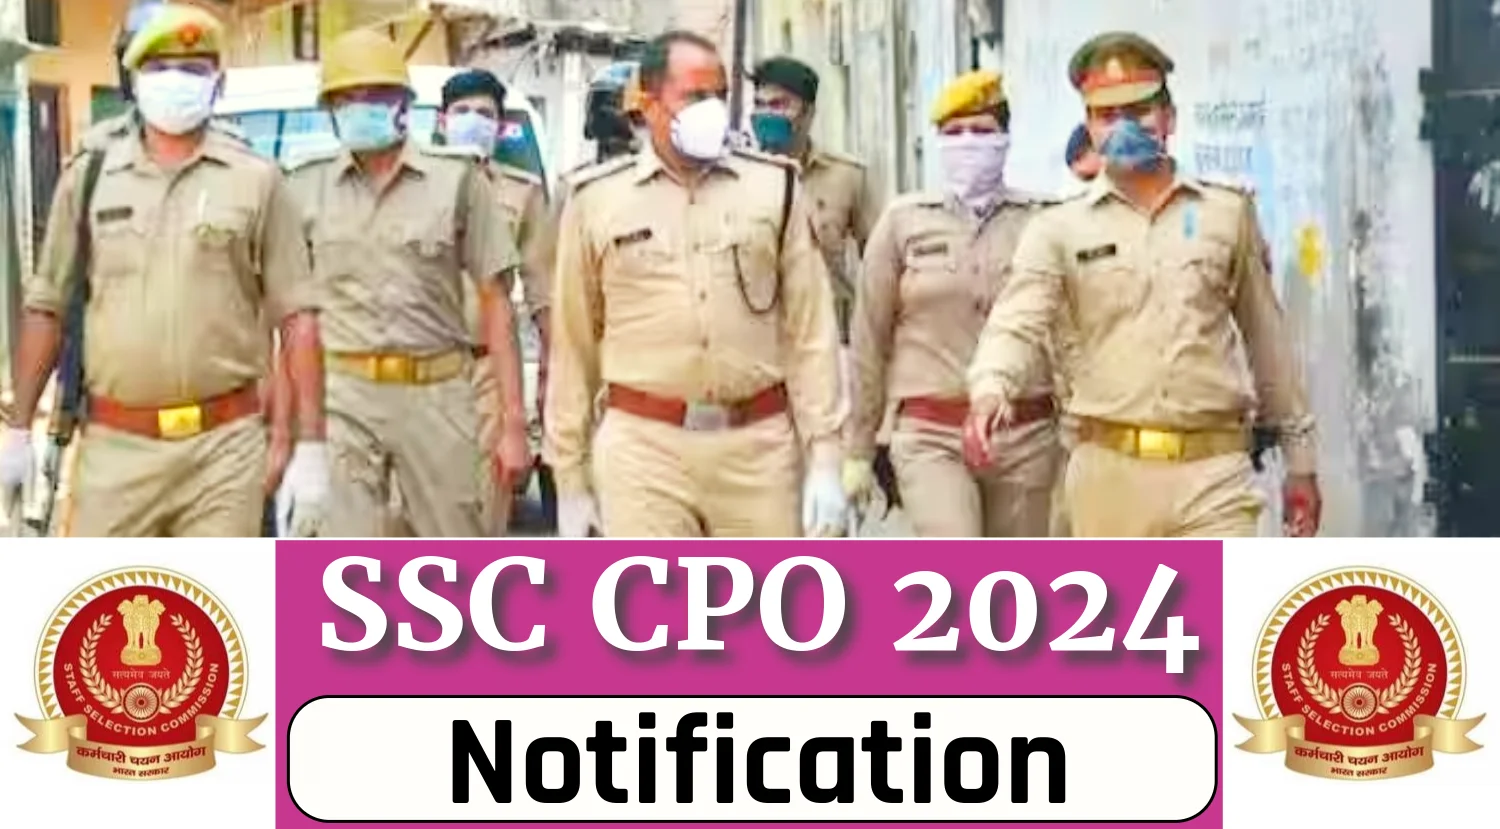 SSC CPO Notification 2024 Out Today, Check Eligibility, Syllabus, Exam Pattern and How to Apply